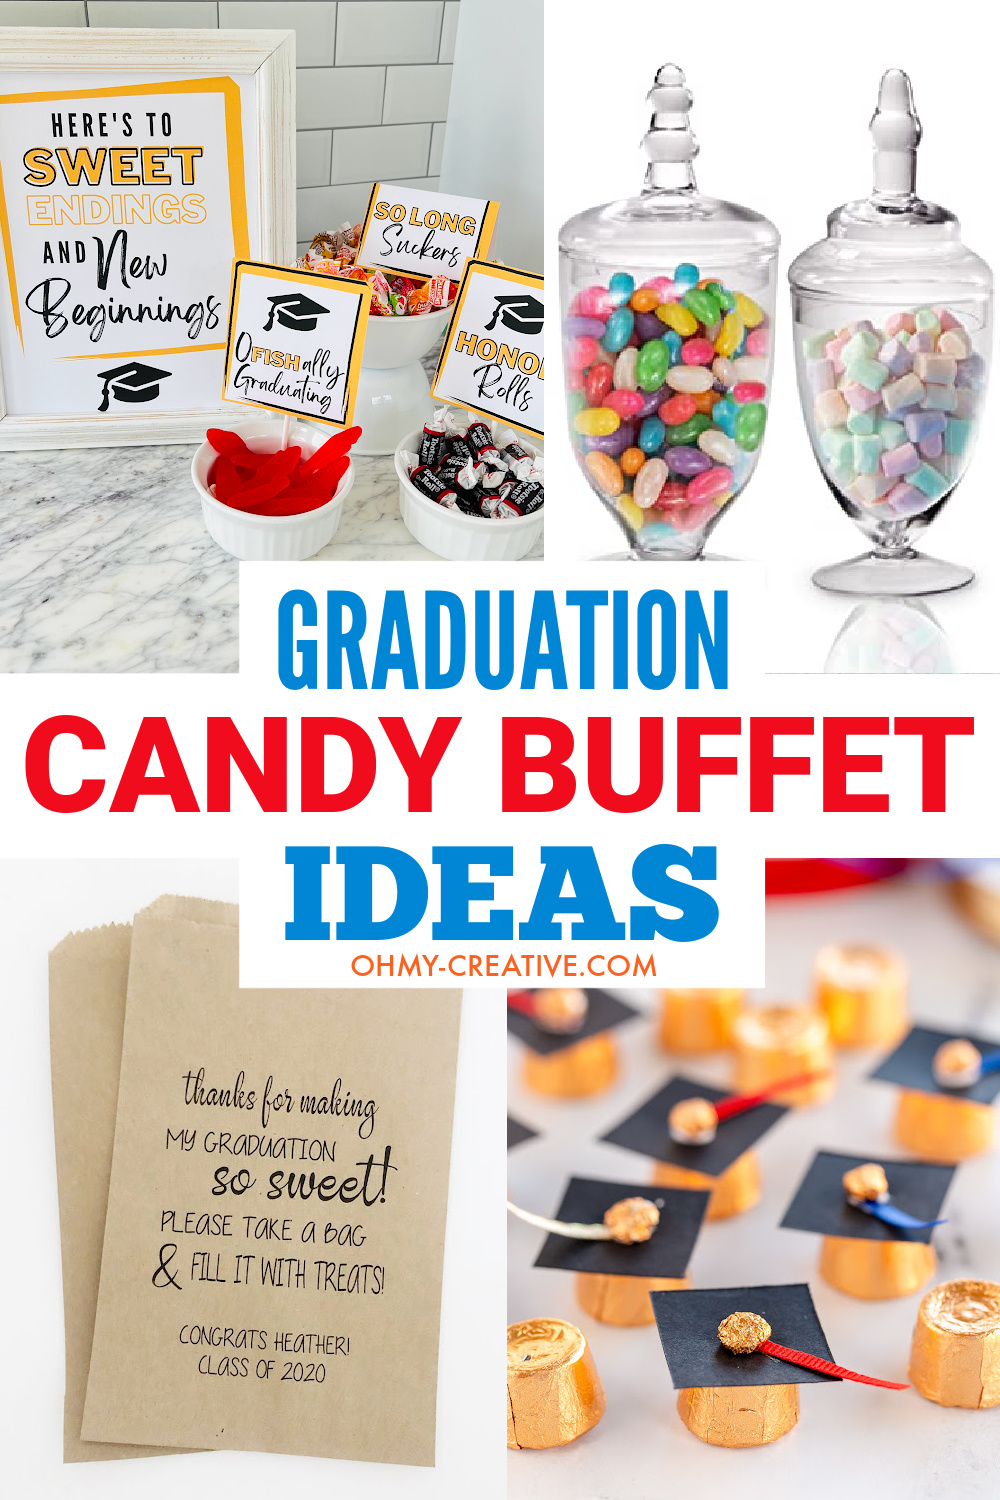 Graduation party candy buffet ideas including printable candy bar signs, graduation party candy favor bags and graduation cap candy.